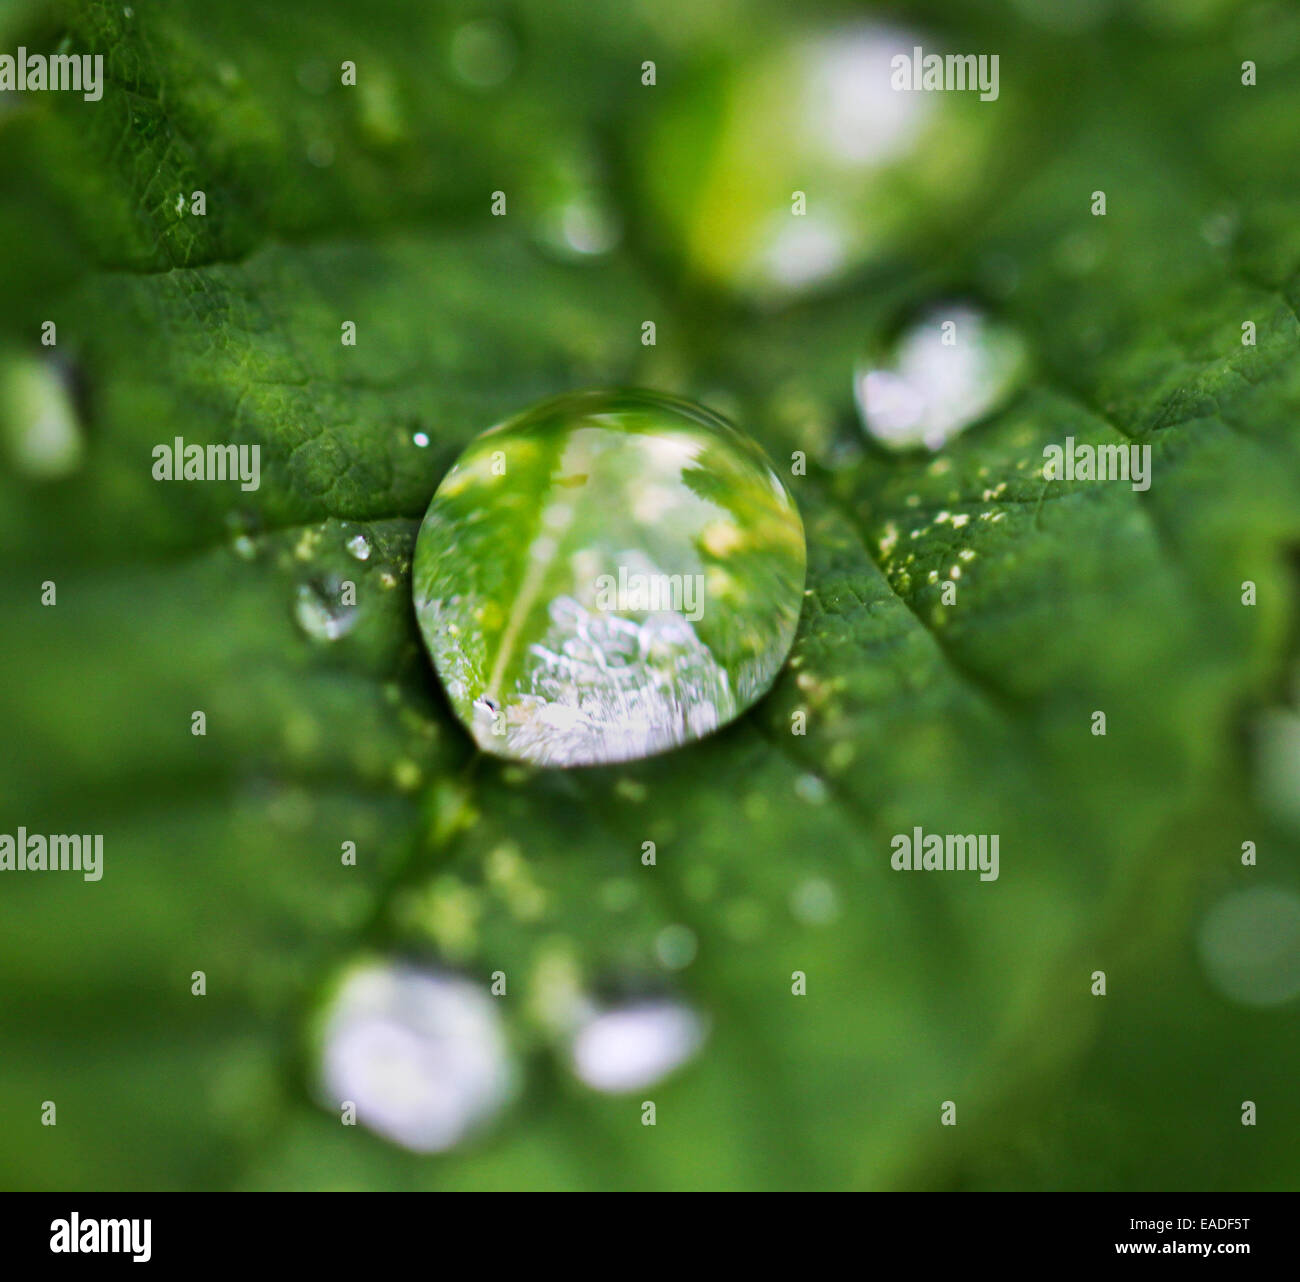 drop of water photographed close-up on a green leaf Stock Photo